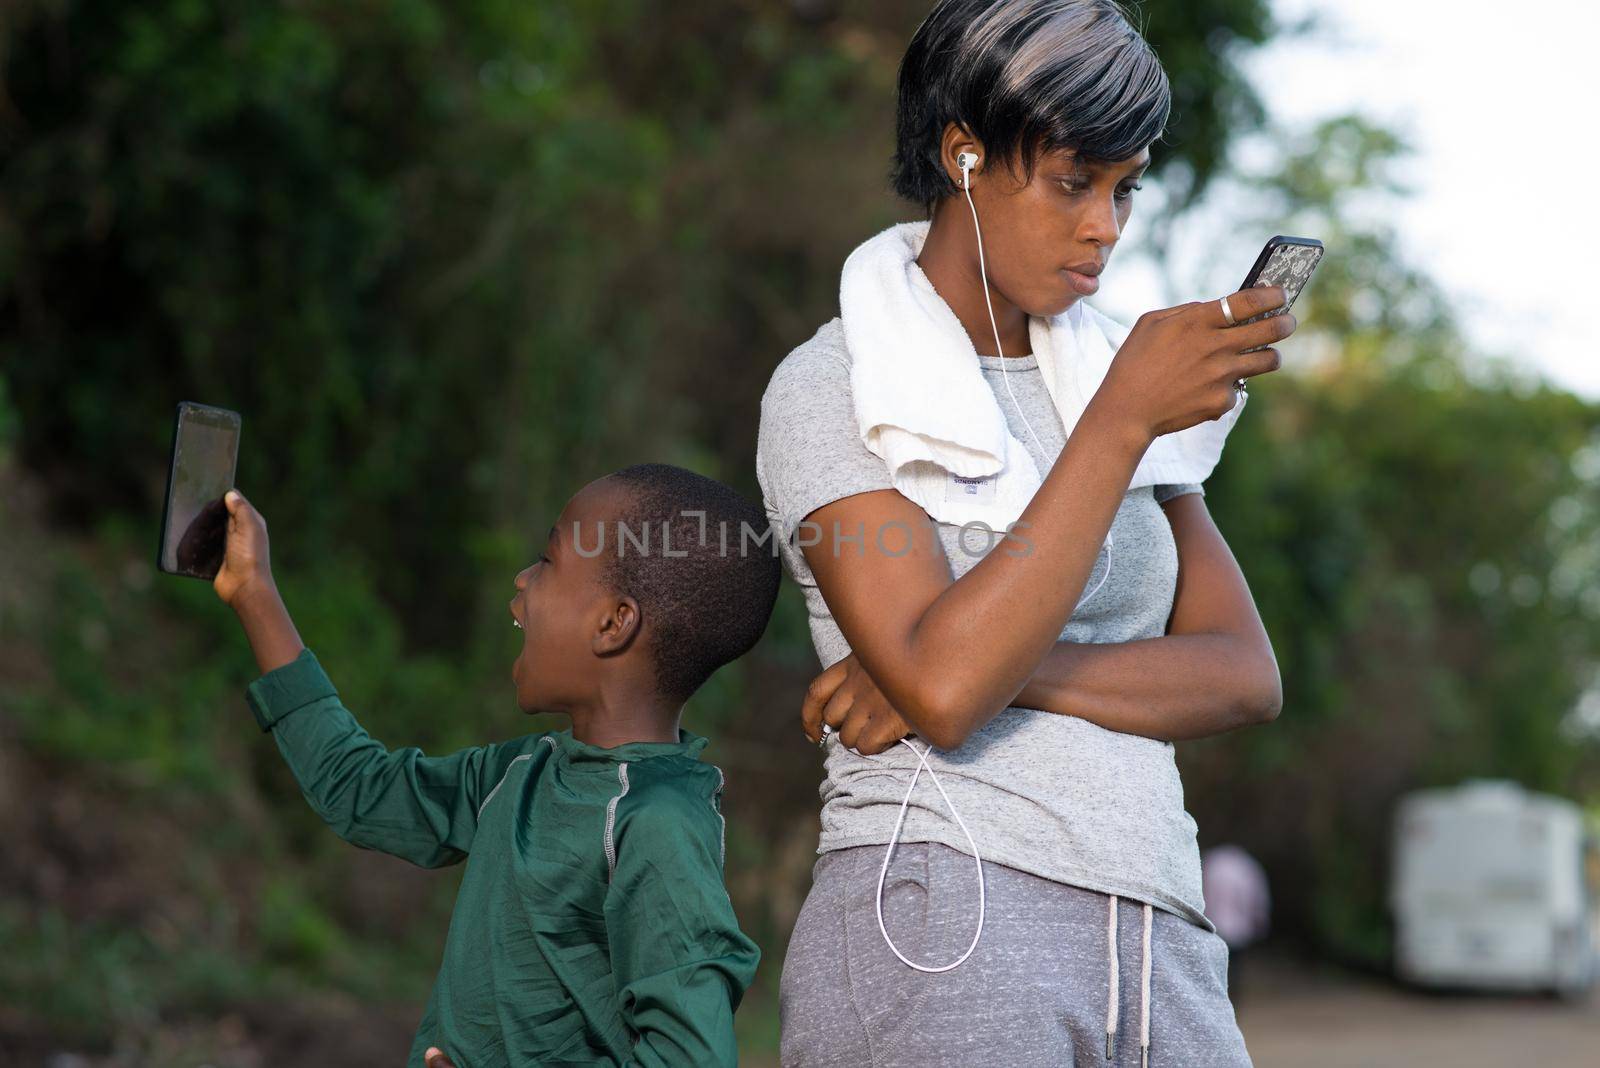 mother and son uses mobile phone outdoors after a fitness session together